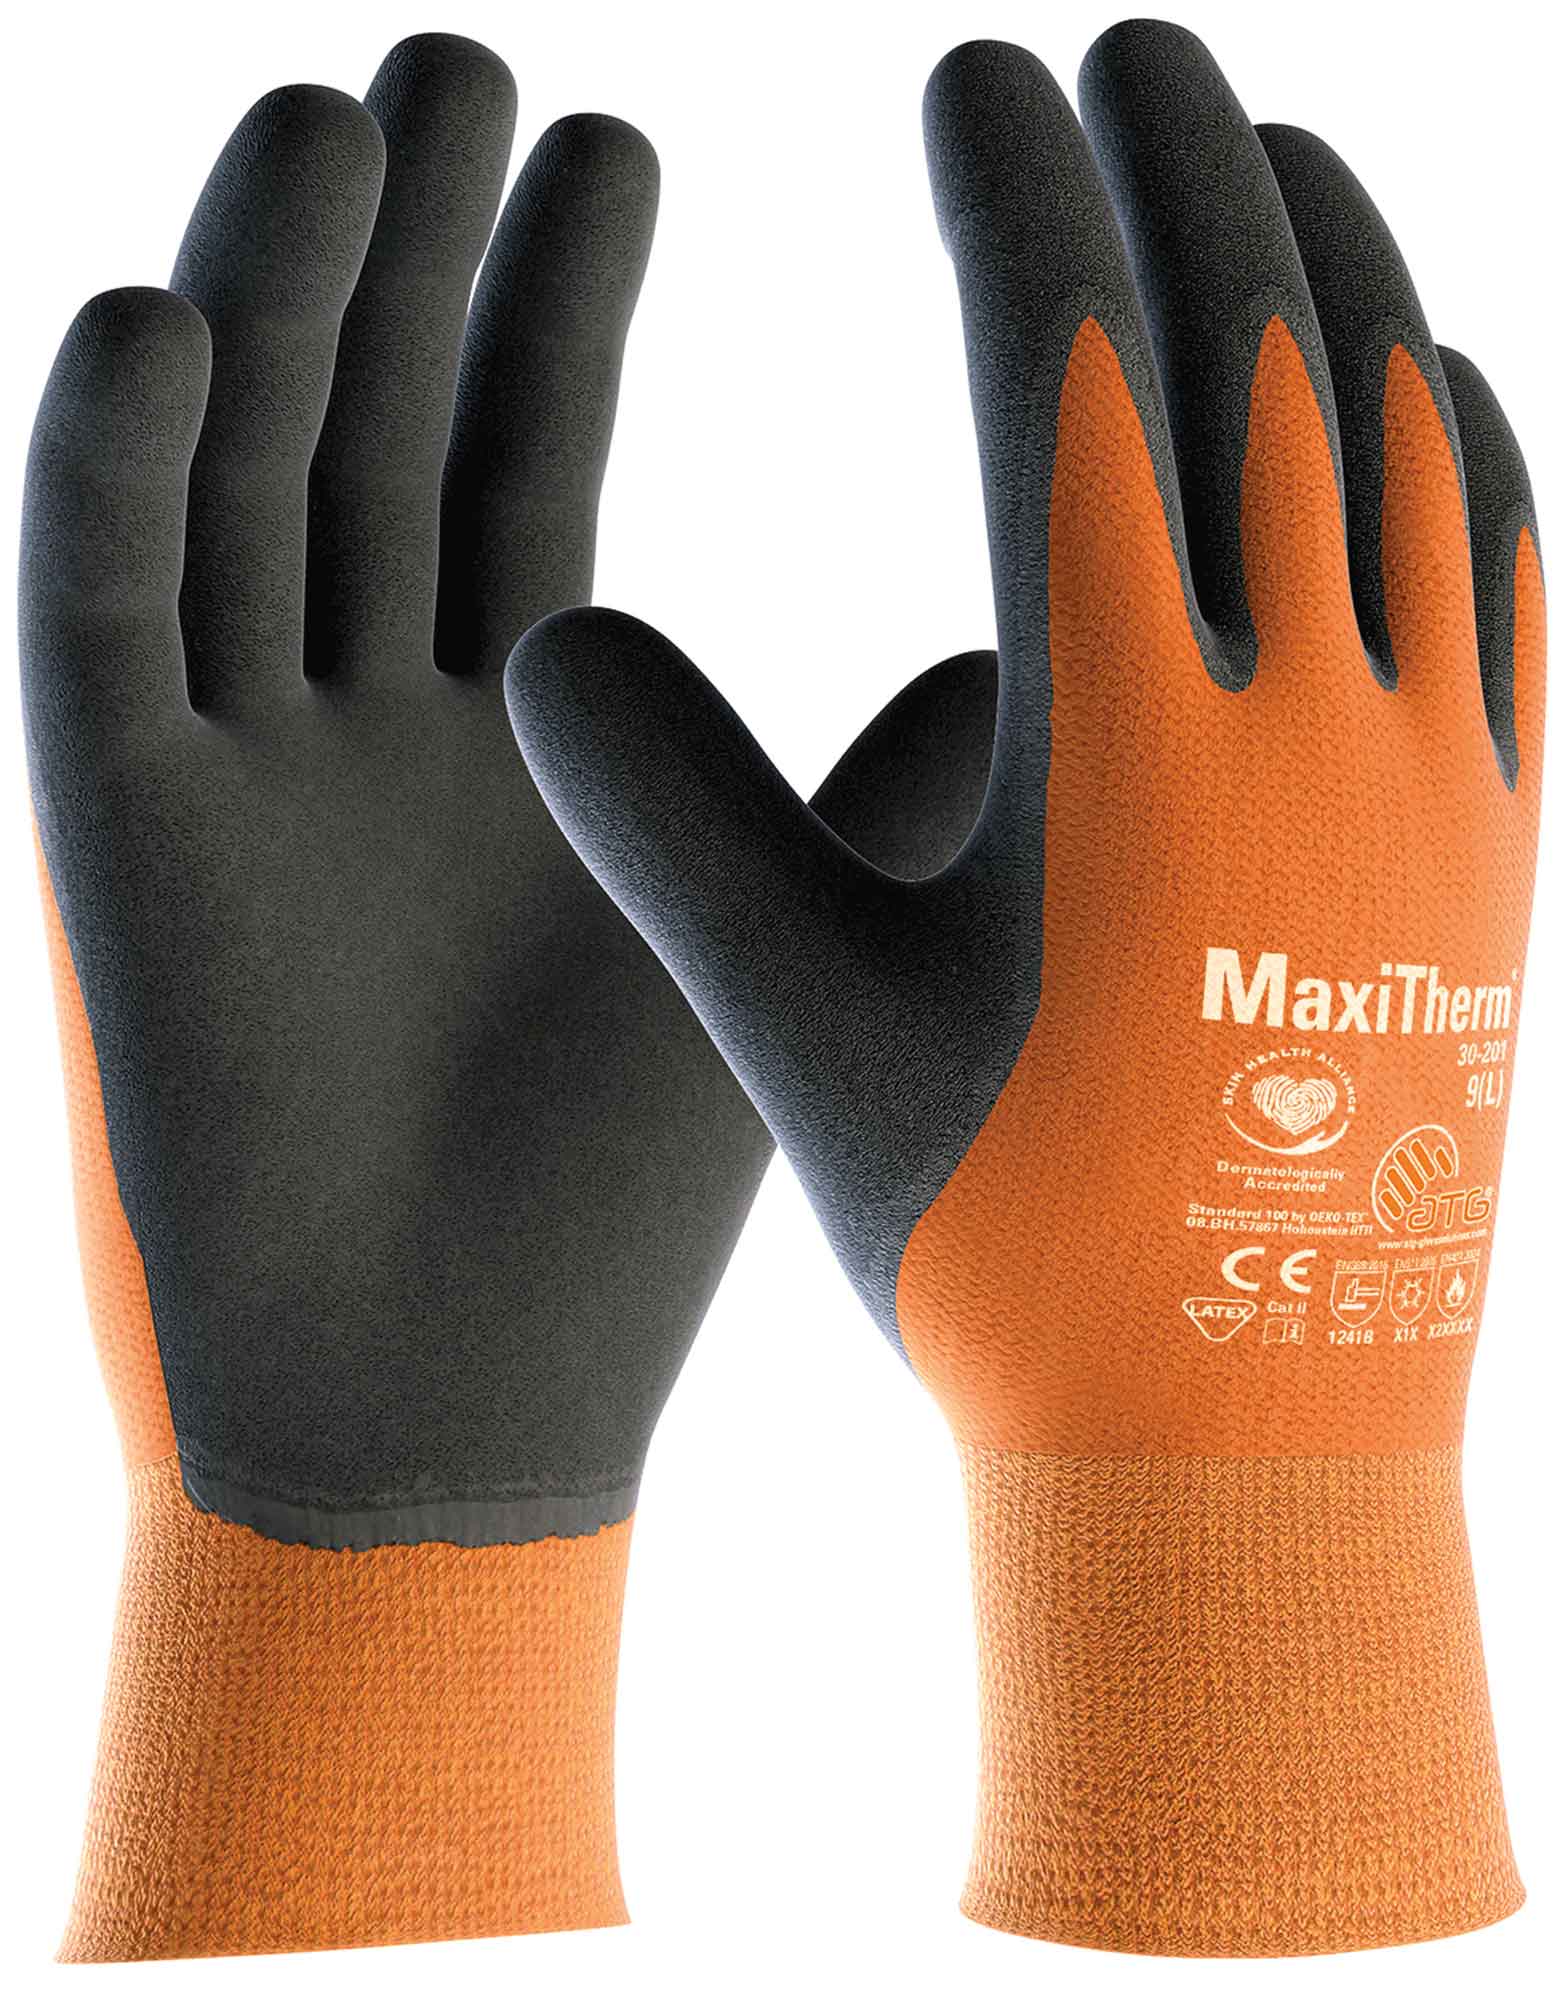 30-201 MaxiTherm® Palm Coated Thermal Lined Glove-image